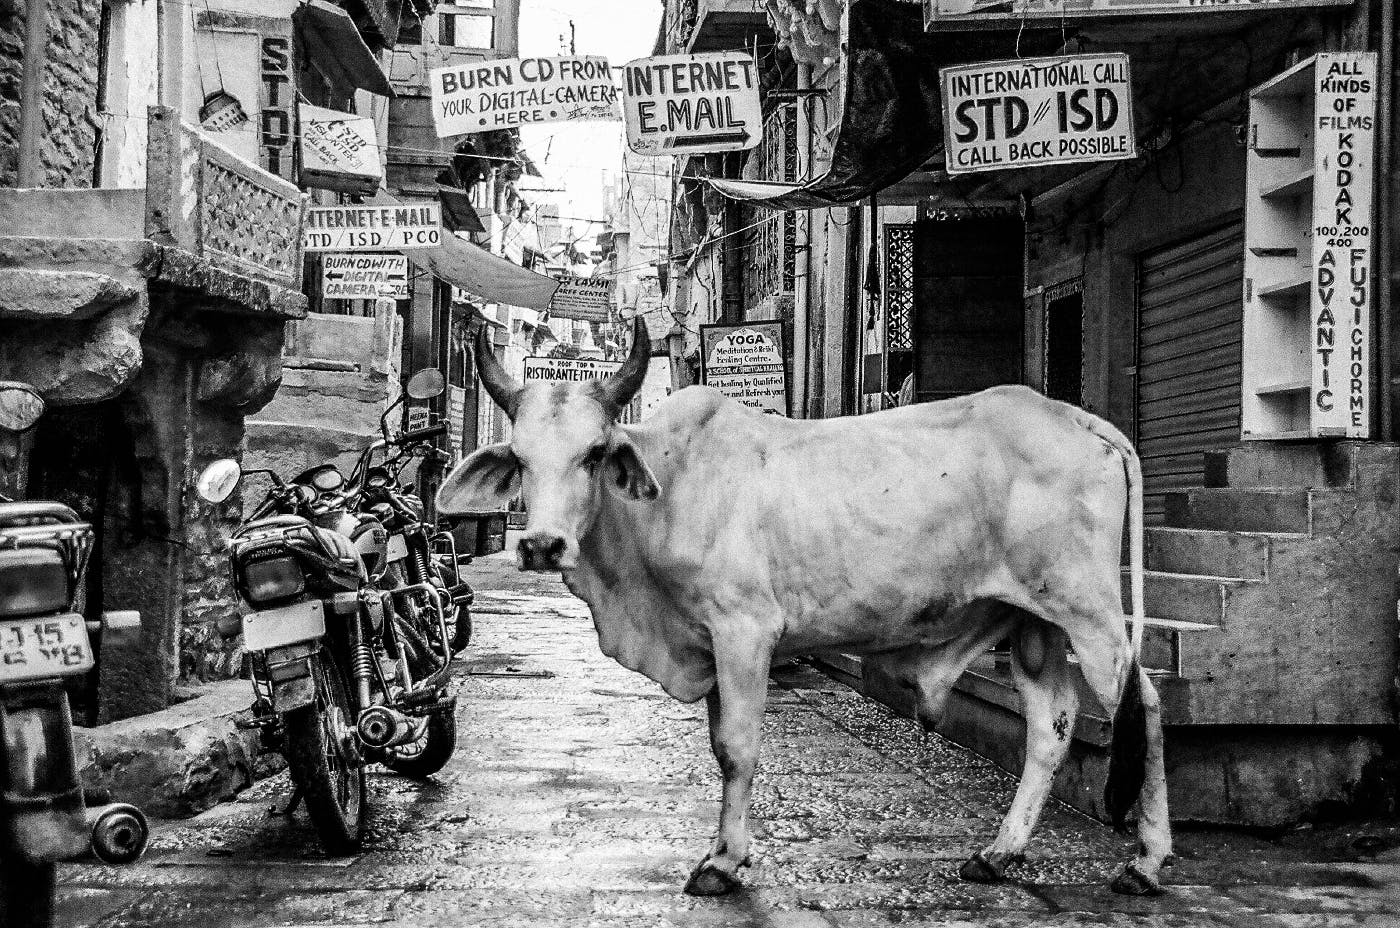 A Brahma bull standing in a stone side street next to a motorcycle